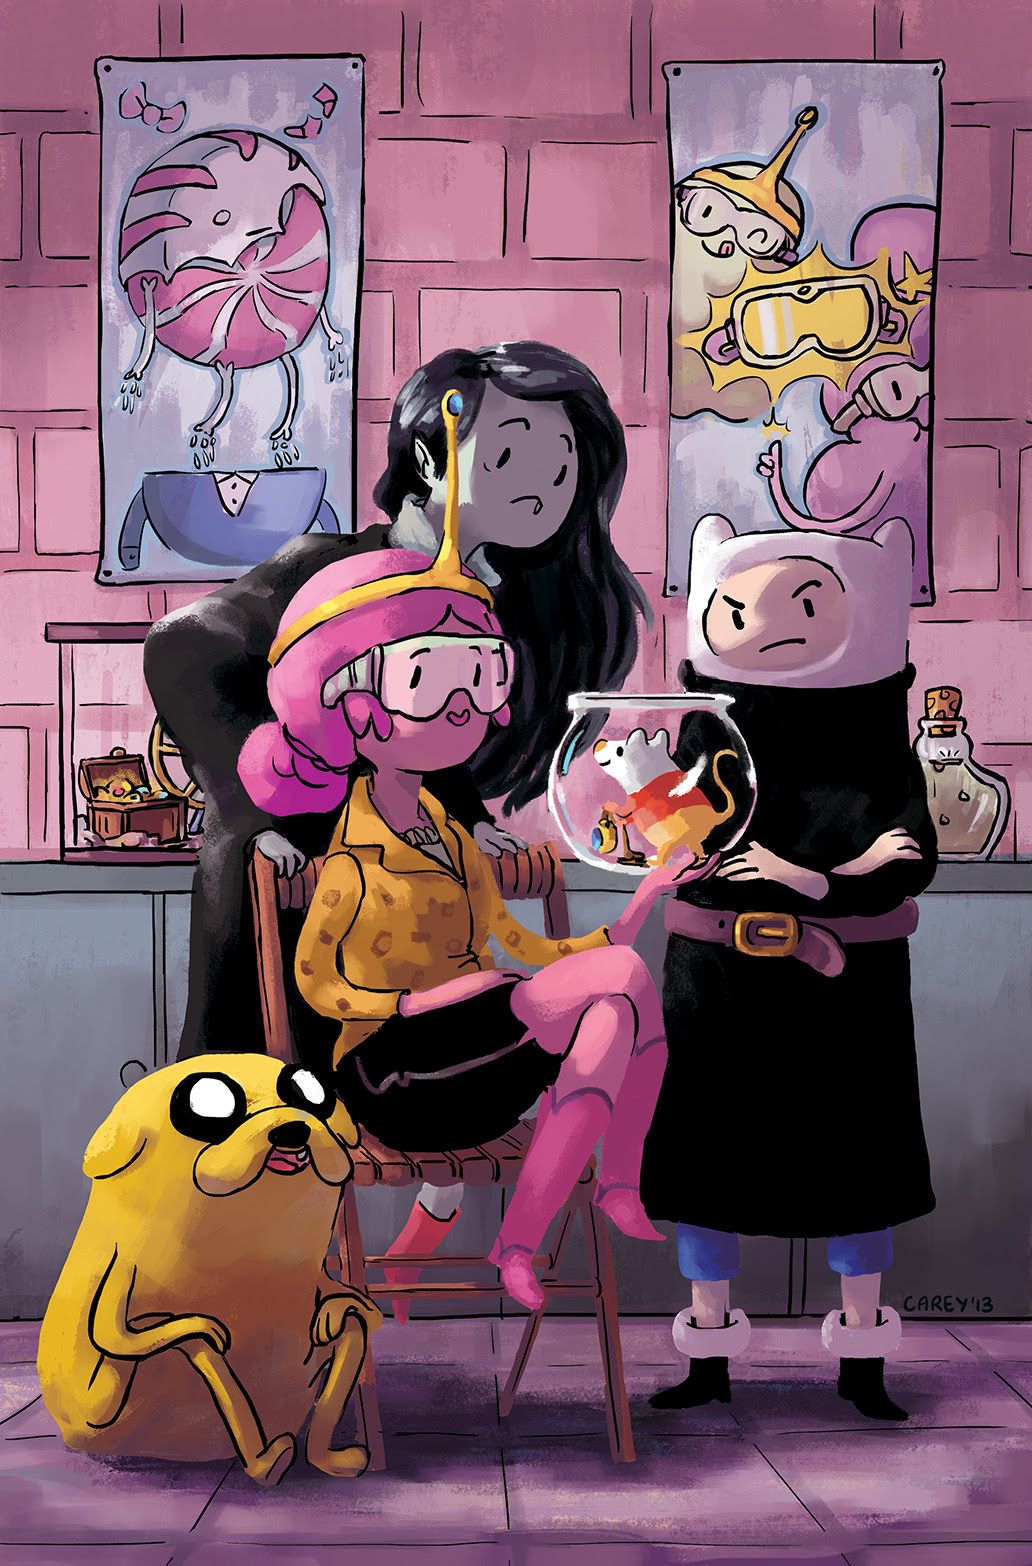 ADVENTURE TIME #29 Cover D by Carey Pietsch